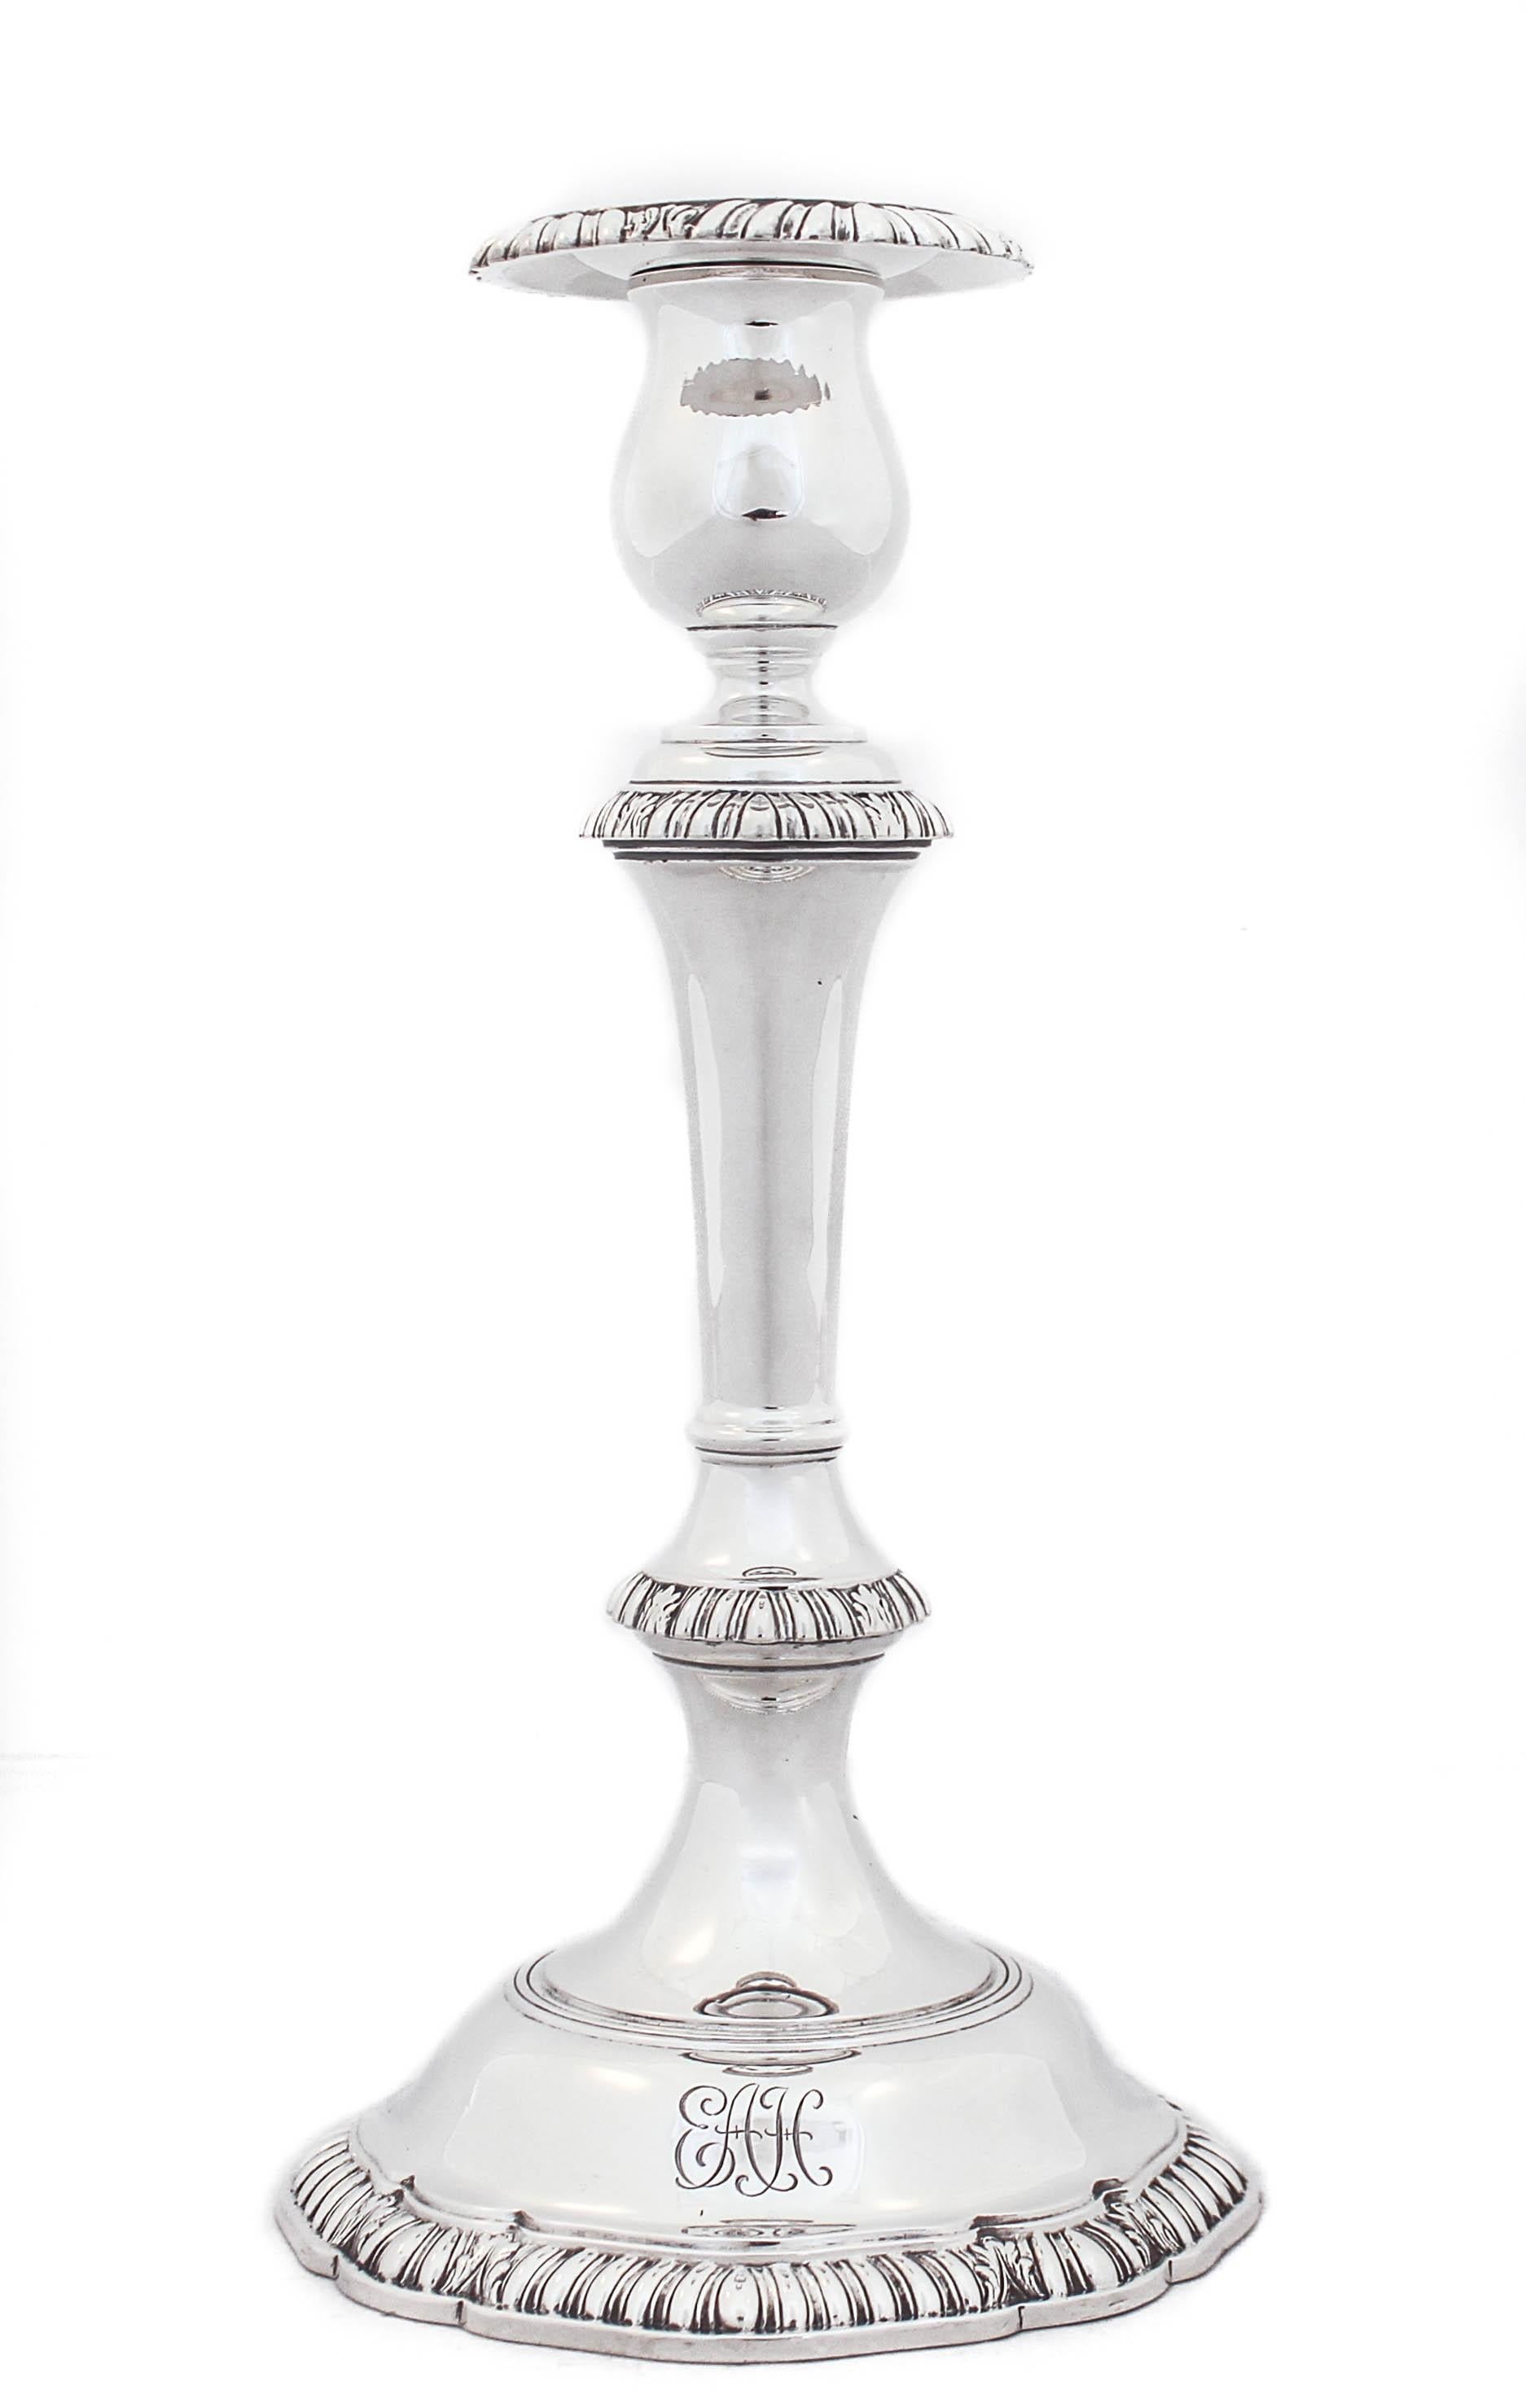 Being offered is a pair of sterling silver candlesticks by Graff, Washbourne & Dunn.  The have a gadroon design around the base, waist, neck and bobeche.  Their shape is classic in that it’s tapered and then opens out on the bottom.  The bobeche are